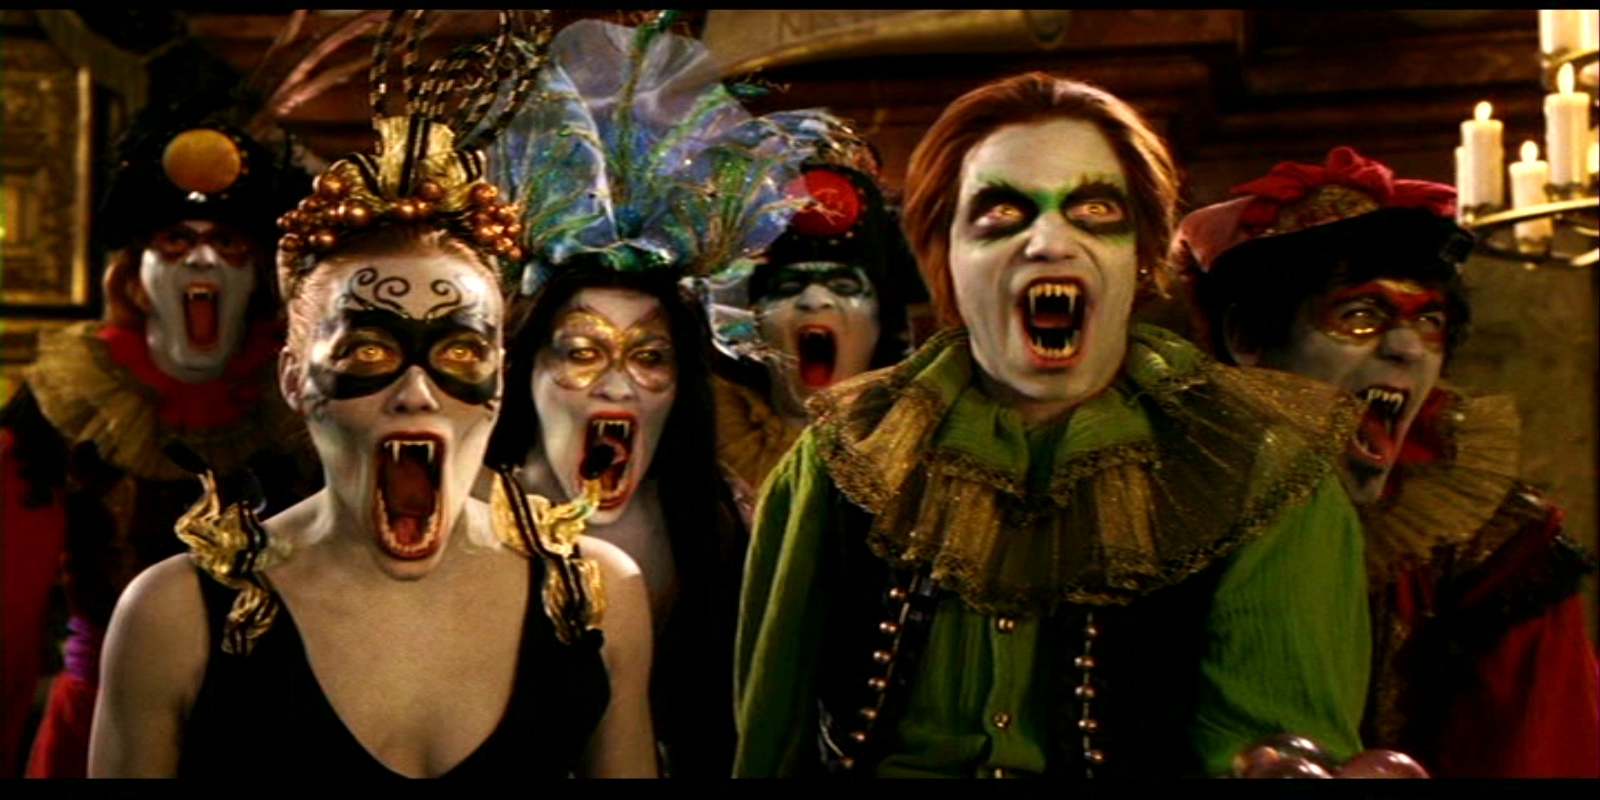 The masquerade ball from Van Helsing.